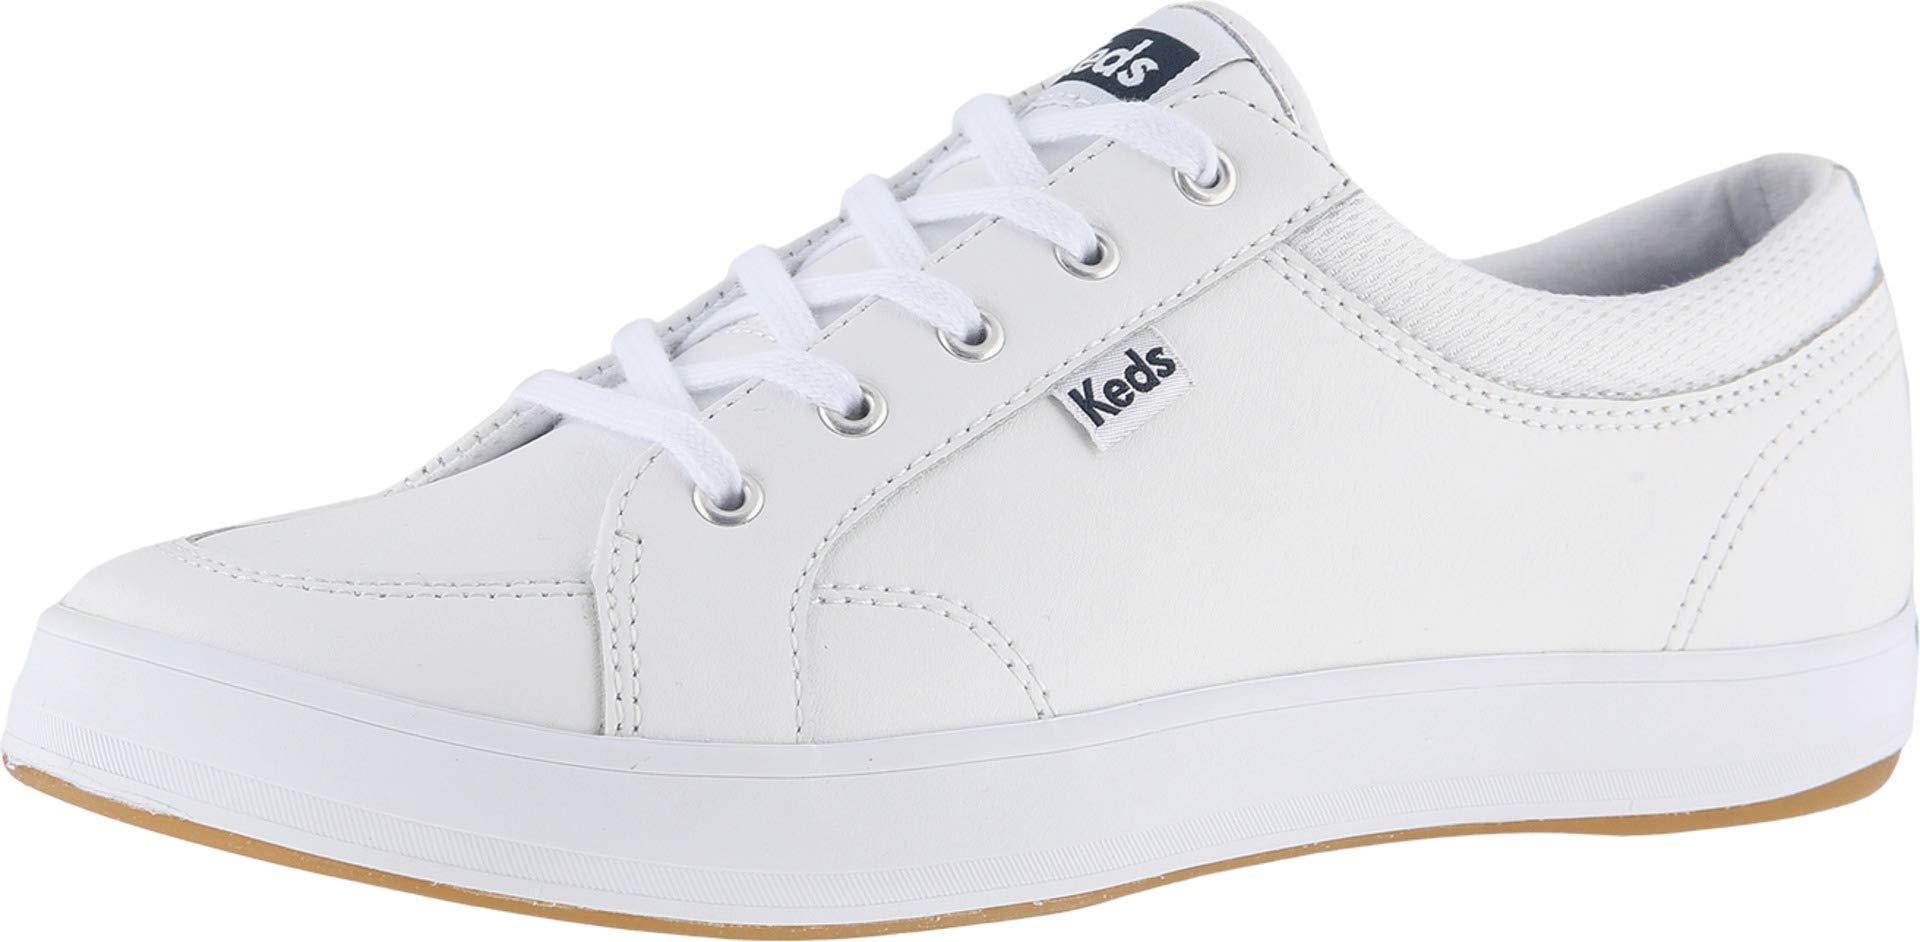 Keds Center Leather in White - Lyst